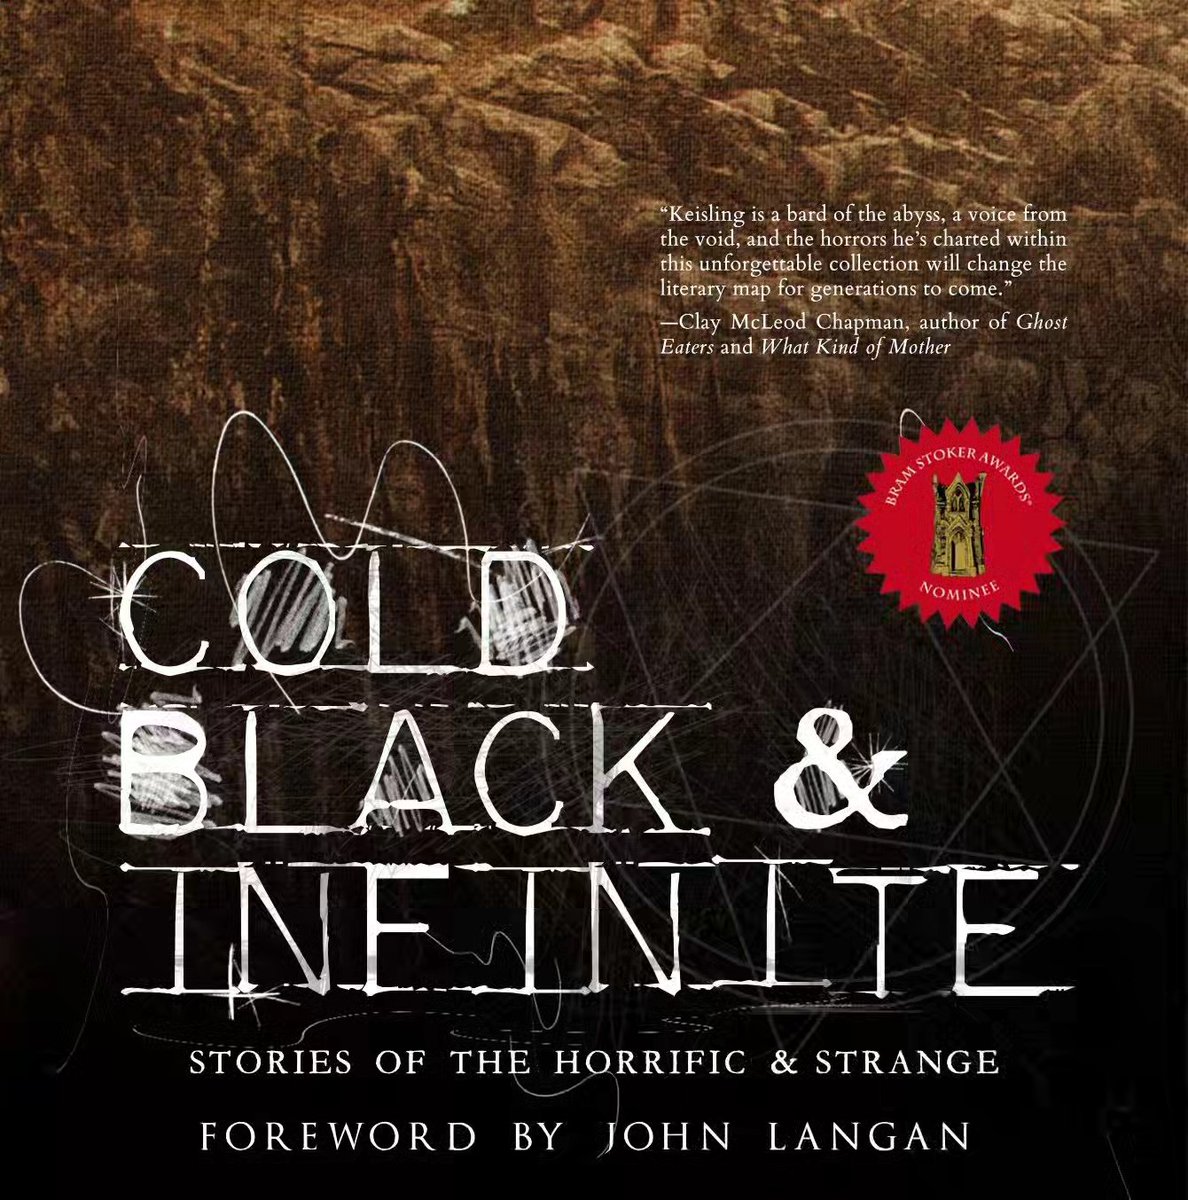 A HUGE congratulations to Todd Keisling, whose book 'Cold, Black, and Infinite' has been nominated for the Bram Stoker Awards. If you are a voting member of the HWA, please reach out to us for a digital reading copy at lisalebel@cemeterydance.com.